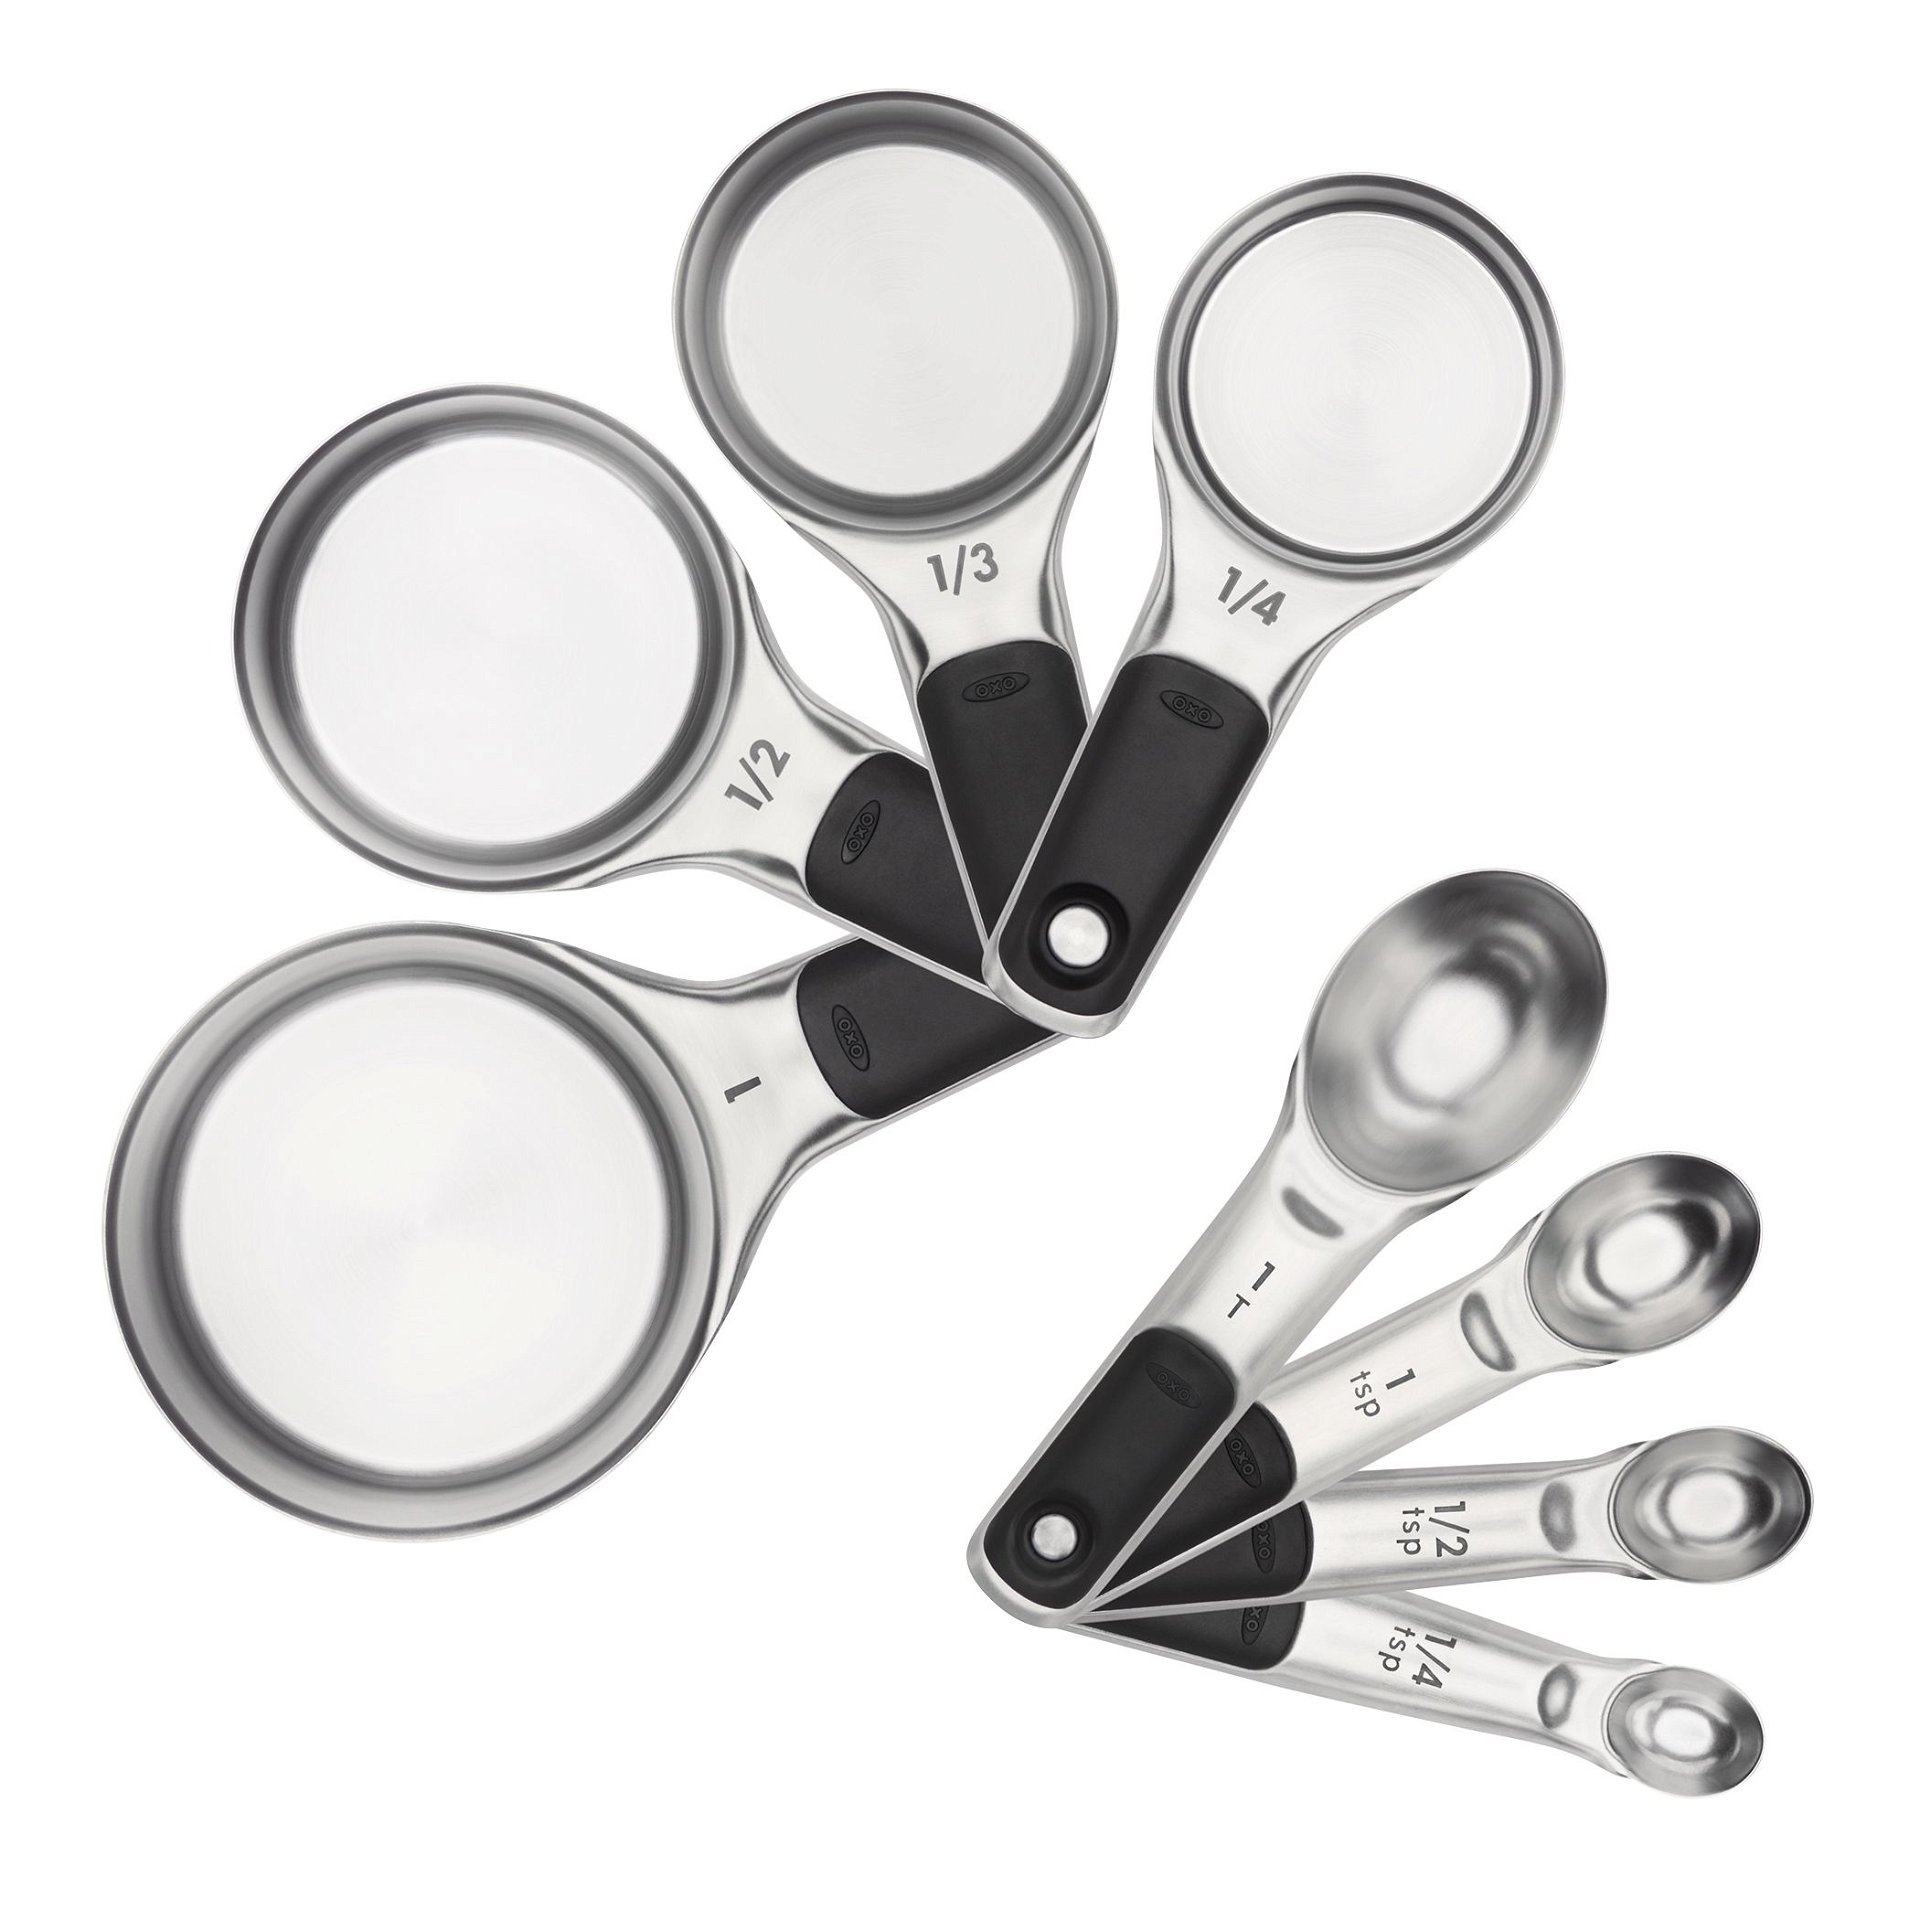 Cuisinart 4pc Stainless Steel Magnetic Measuring Cup Set Black